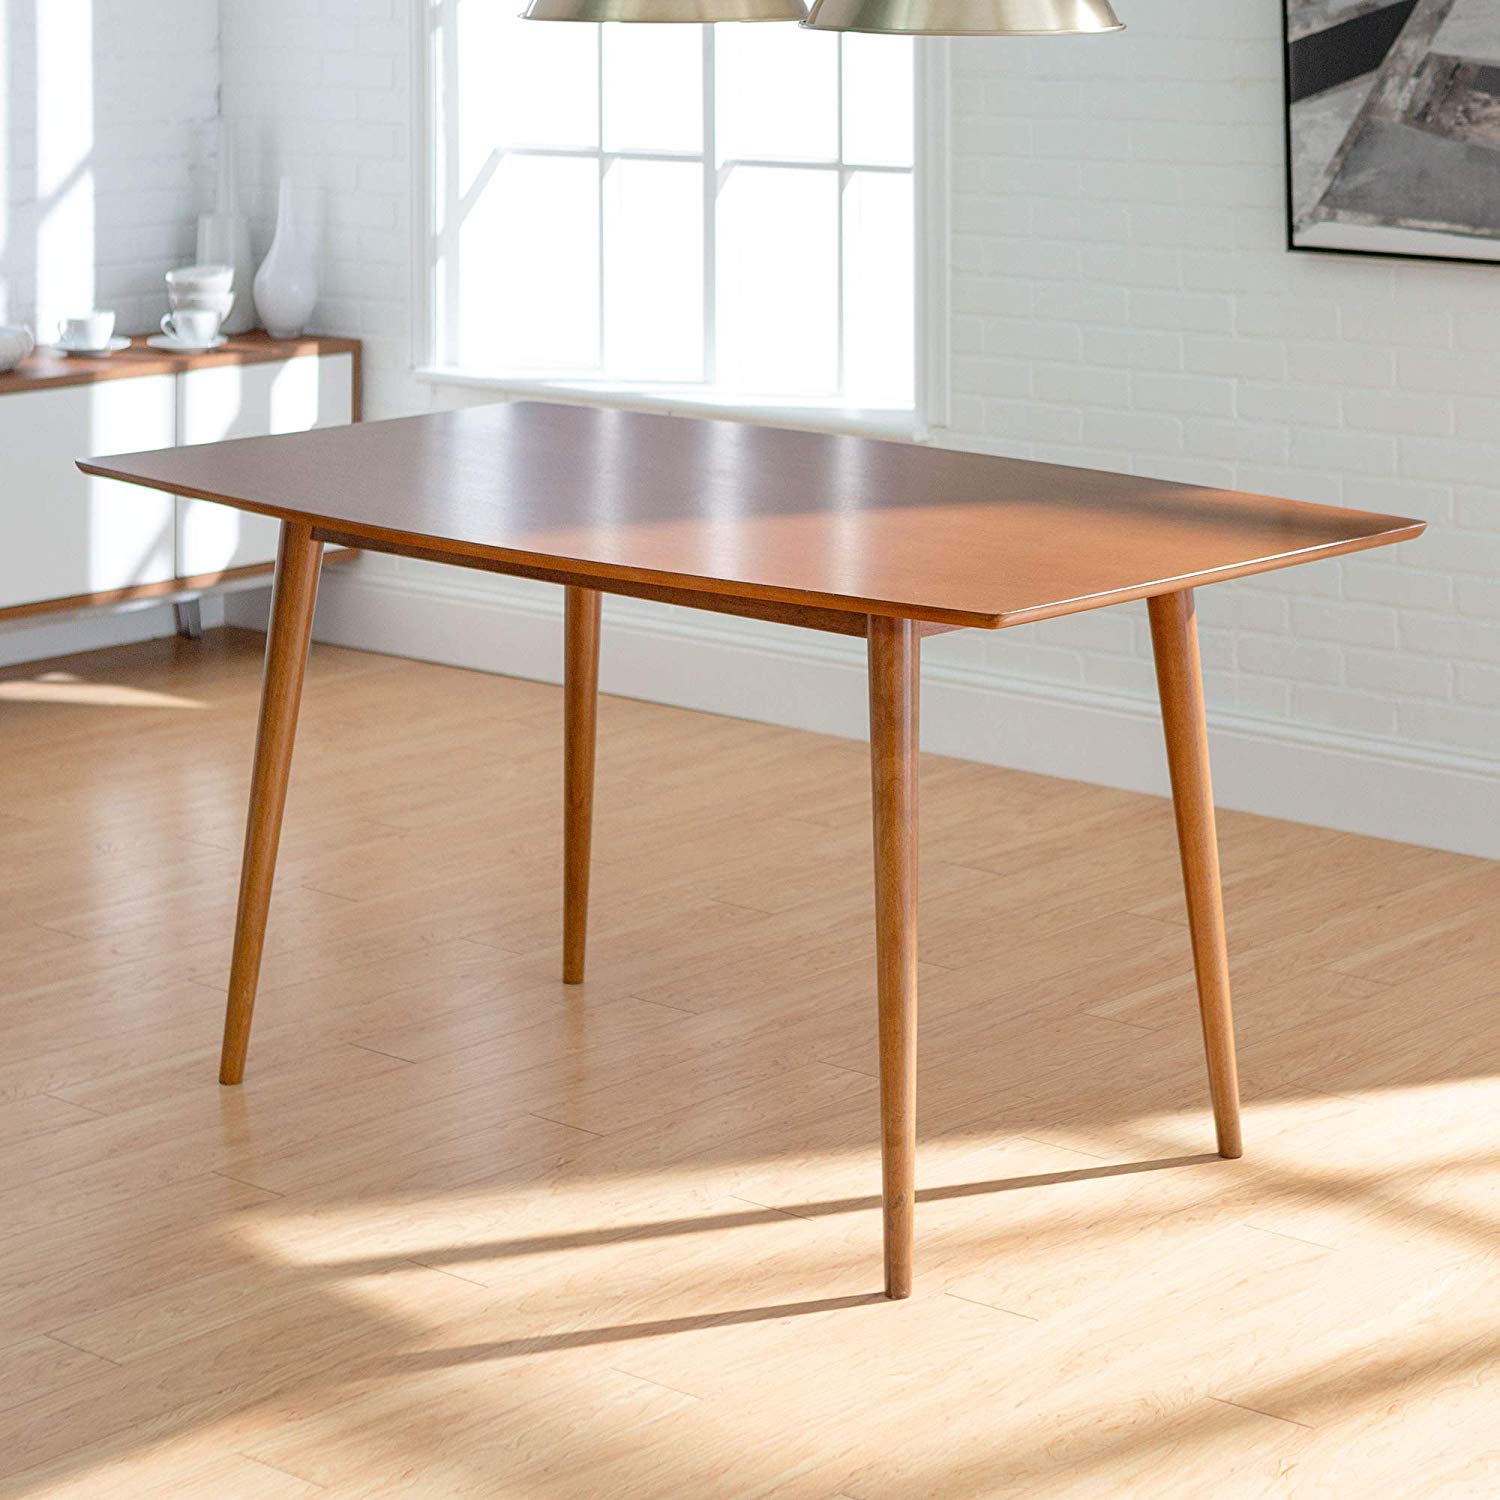 60" Mid-Century Modern Wood Dining Table by WE Furniture - Mid Decco